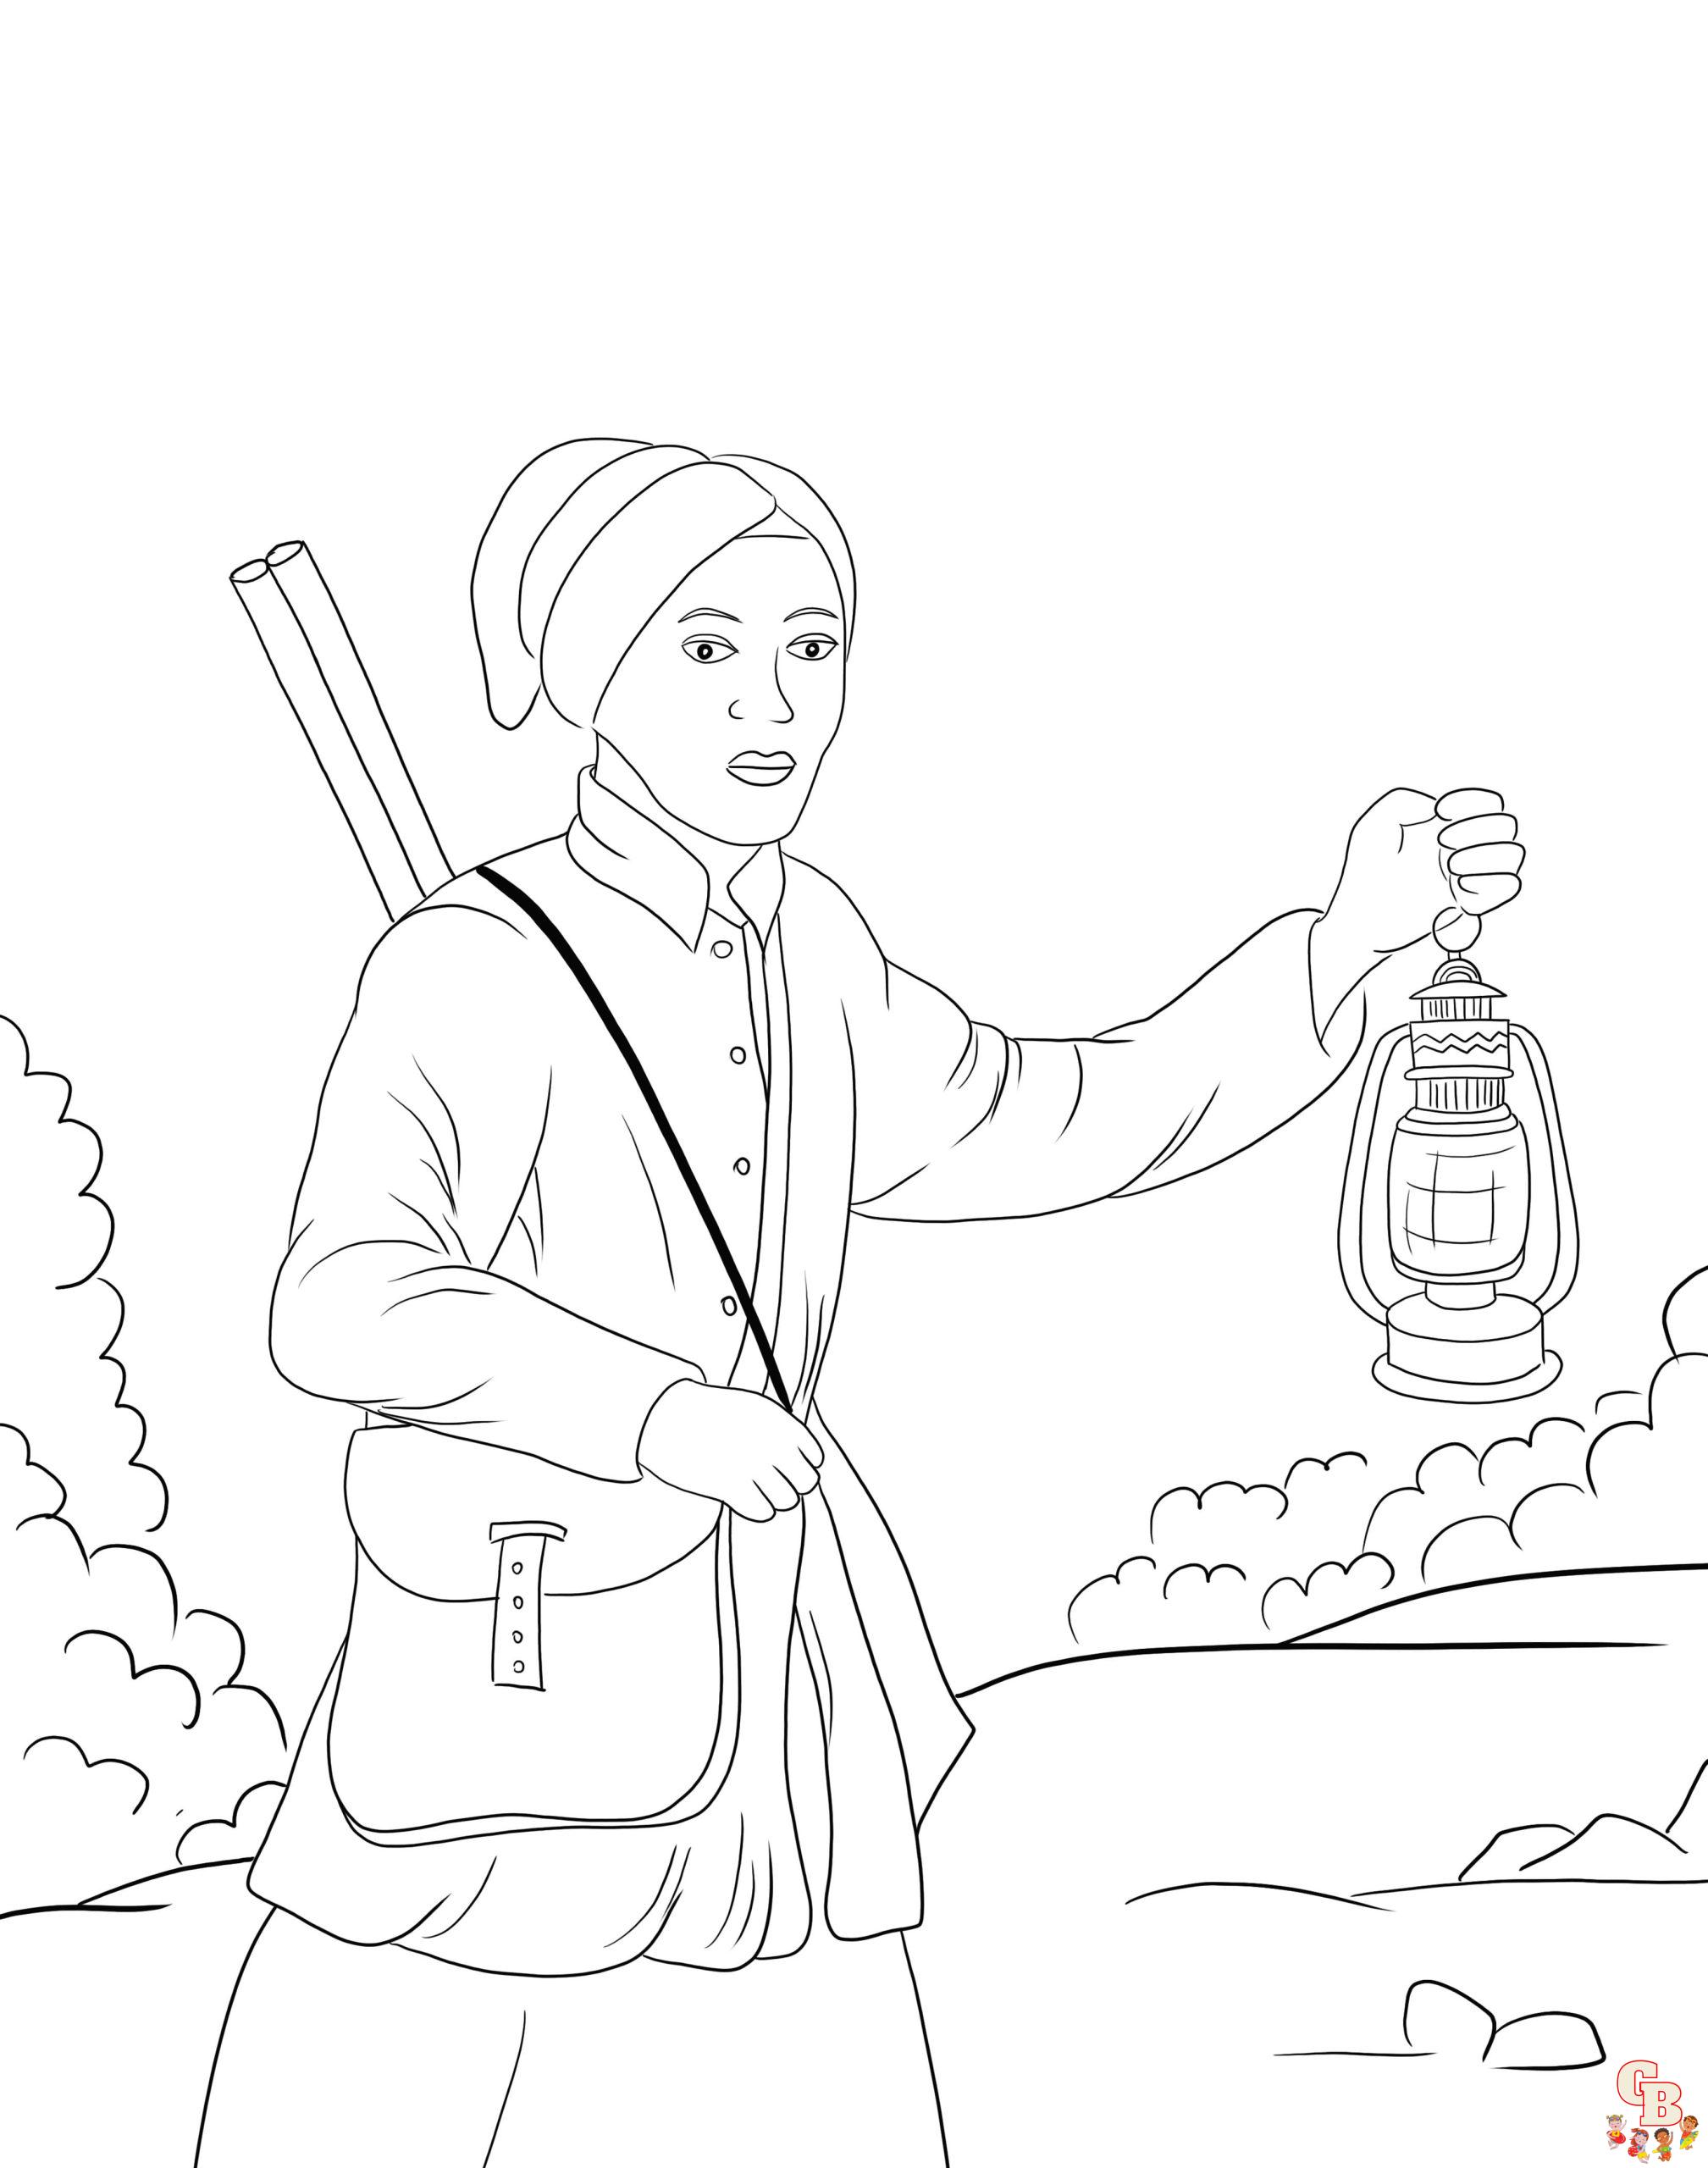 Harriet Tubman coloring pages to print